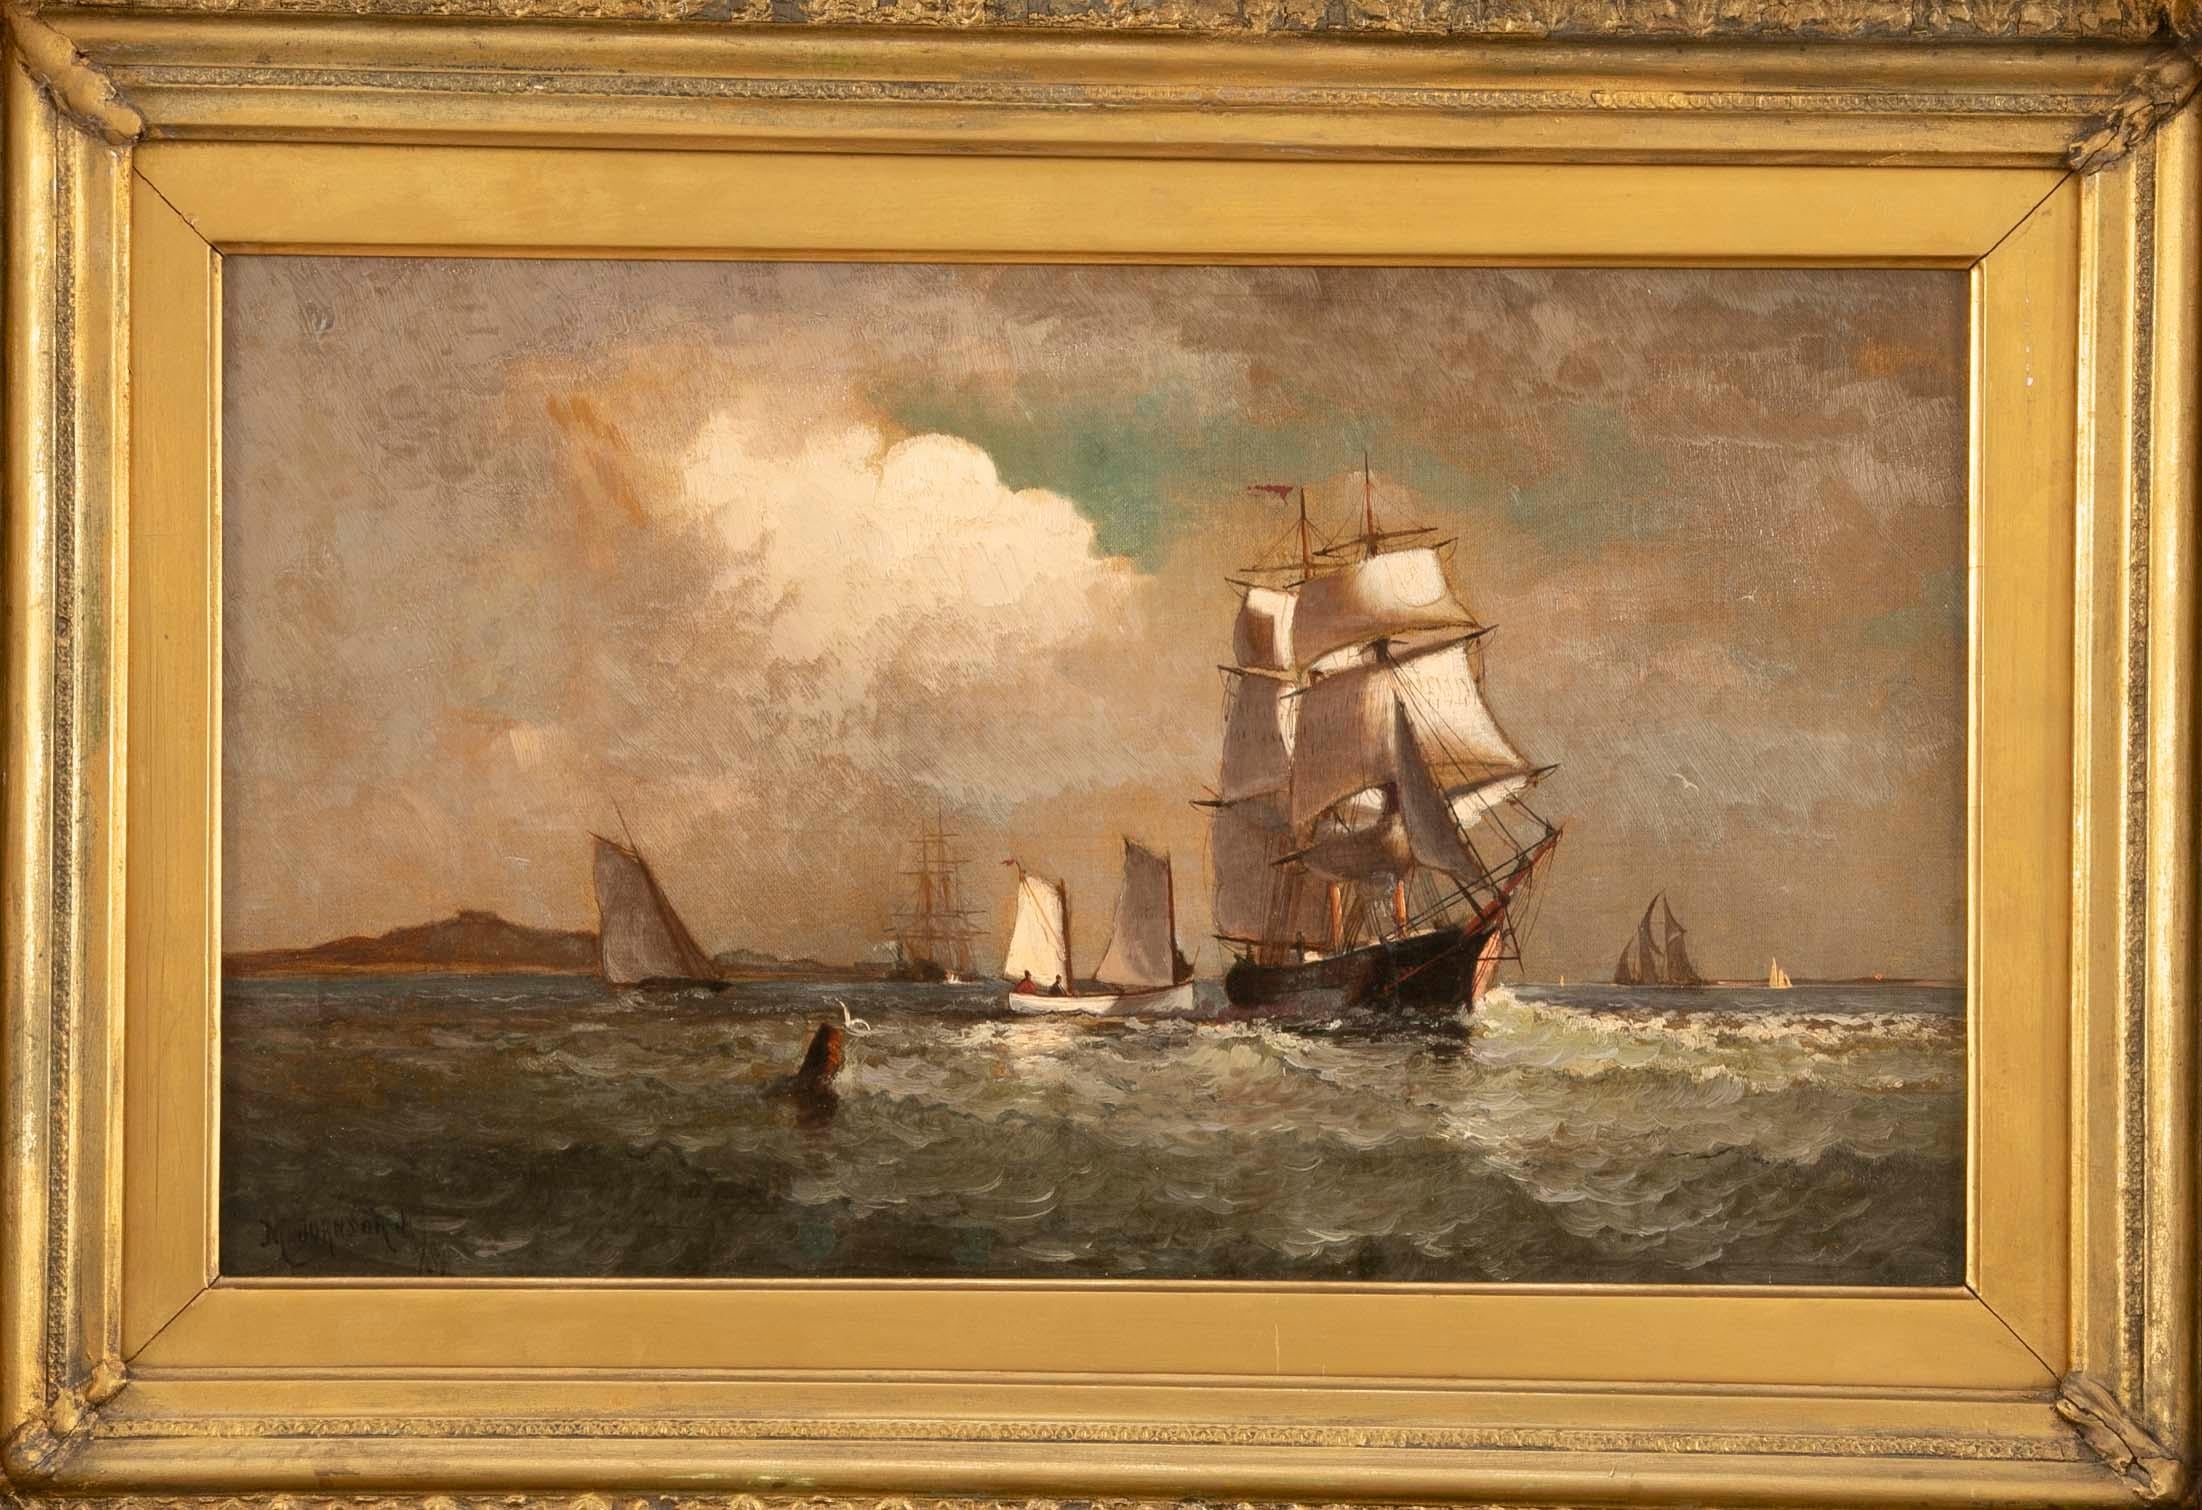 Signed oil on canvas by award winning American marine artist Marshall Johnson
(1850 - 1921) of various sailing vessels off the coast in morning light.